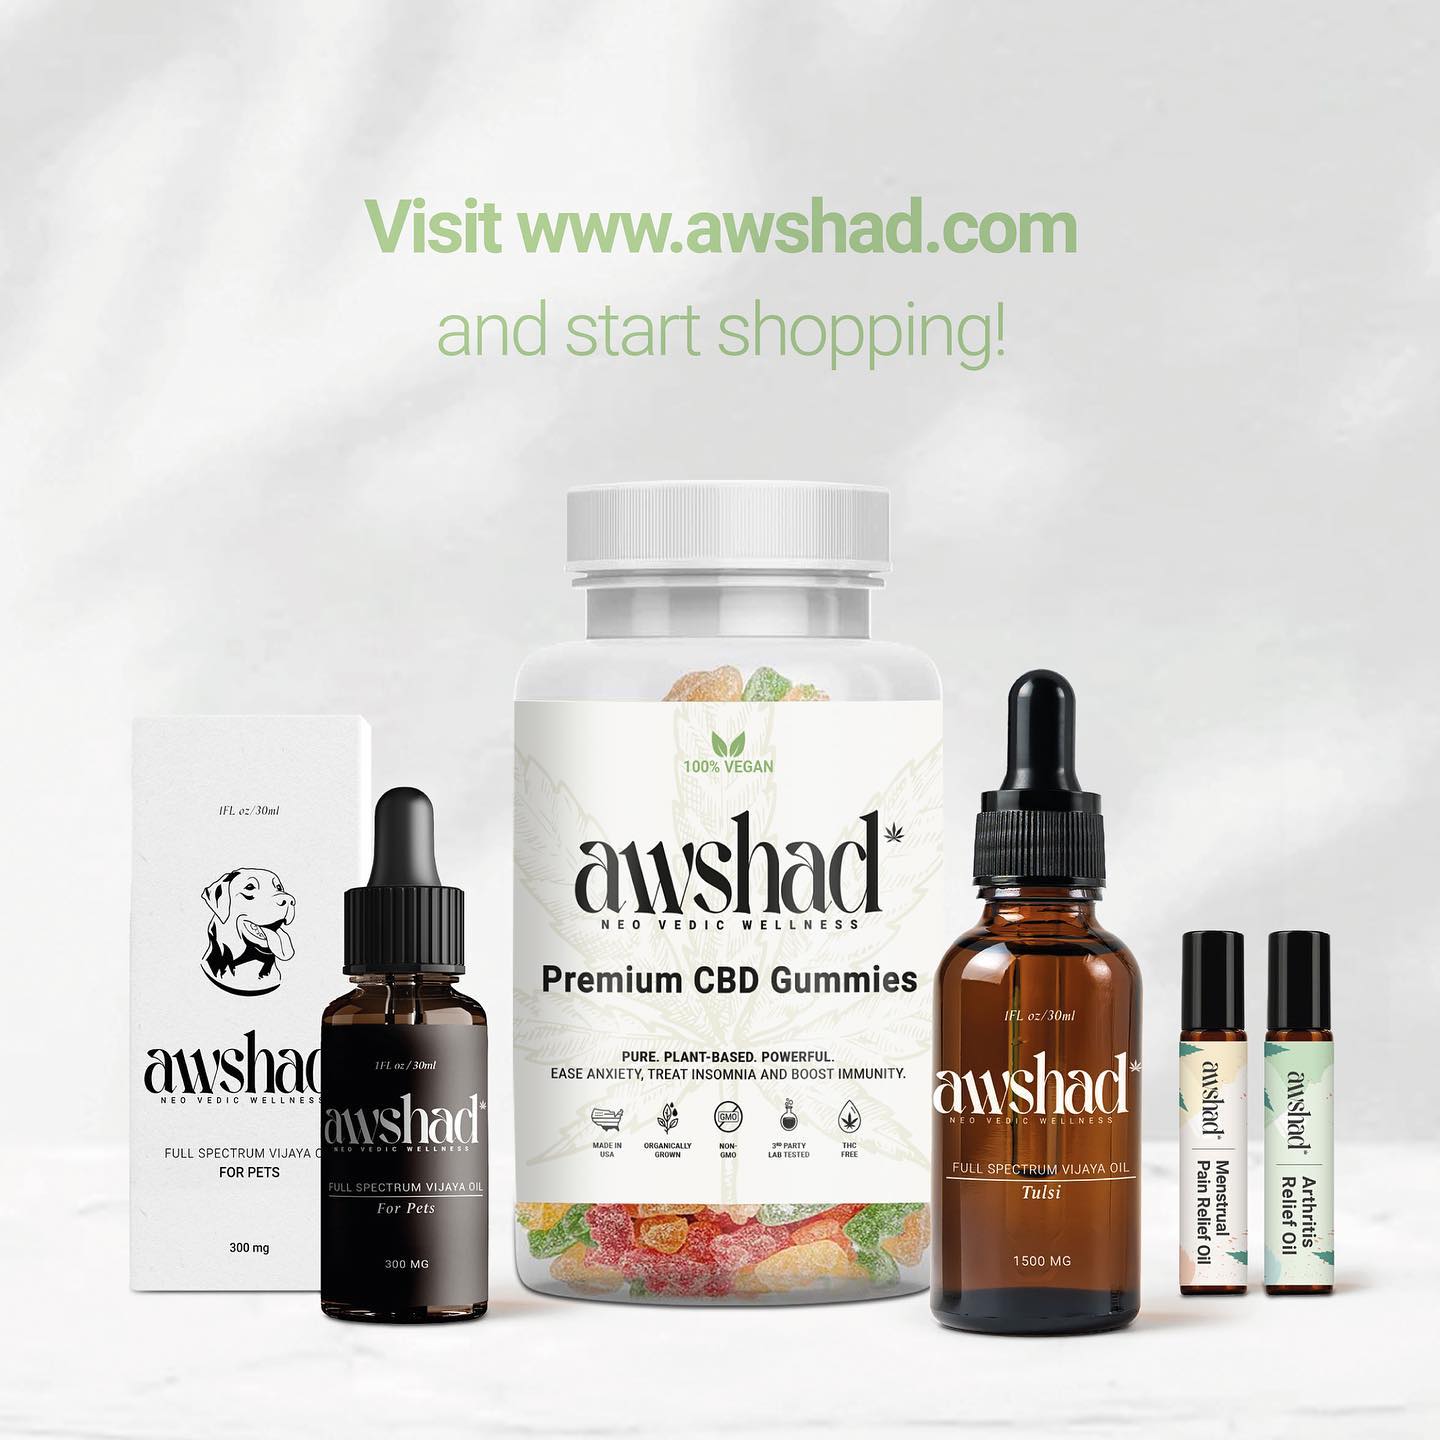 We are always thinking about your health and wellness. This is why we are making products that help you live your best life. Here is our range of products to provide a better experience to you. Shop them all at www.awshad.com

#awshad #allnatural #hempbenefits #rollon  #wellness #gummies #newlaunch #vijayaoil  #hempextract #hempproducts #pets #health #healthandwellness #healthy #cbdoil #heal #natural #naturalremedy #ordernow #care #love  #safe #doctor #ayurveda #healing #newproduct